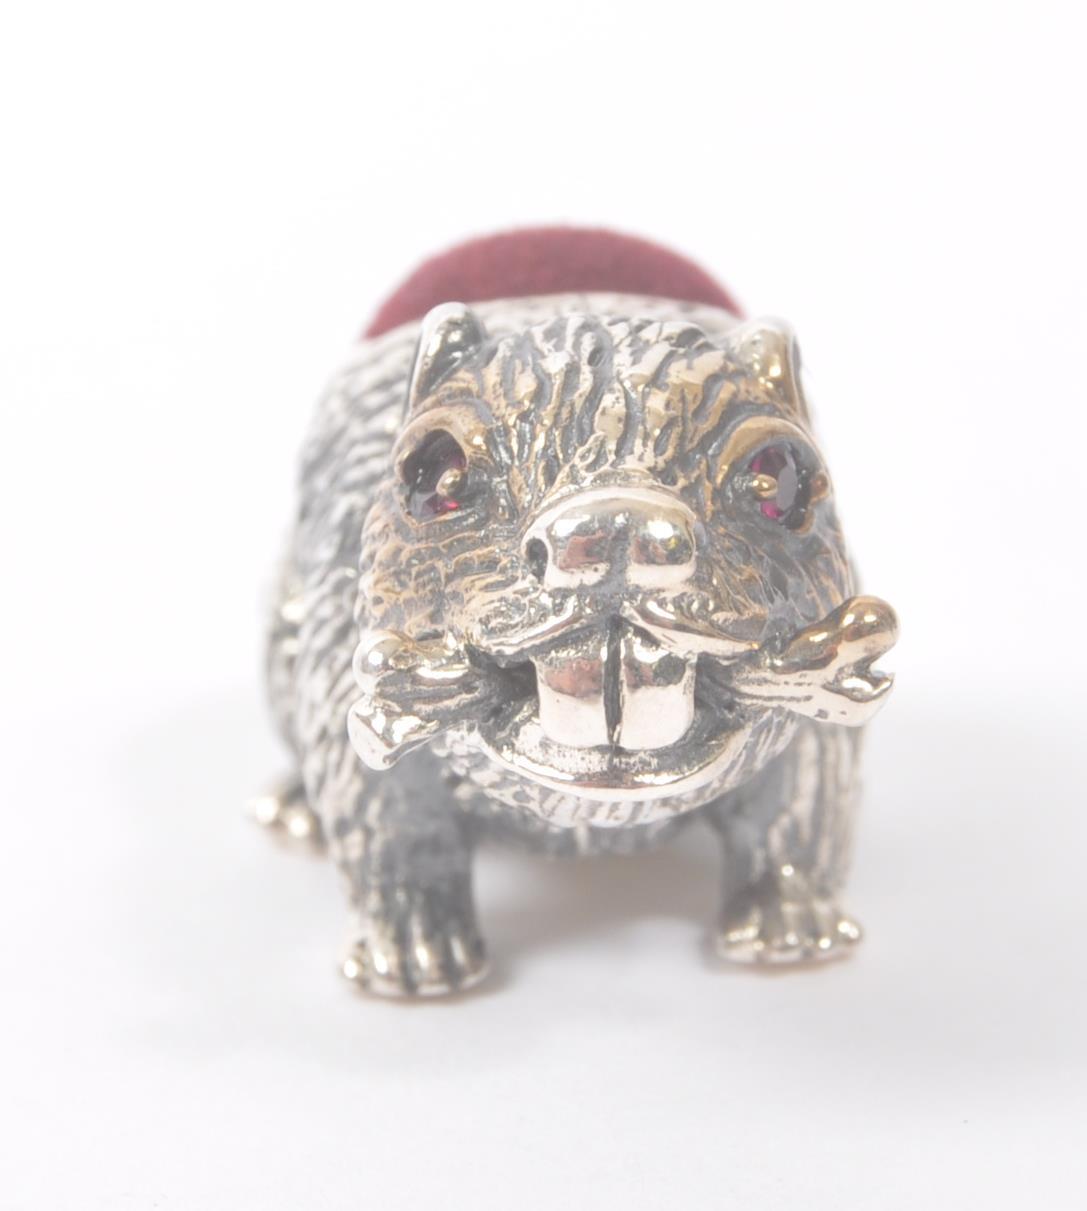 STERLING SILVER PINCUSHION IN THE FORM OF A BEAVER - Image 5 of 5